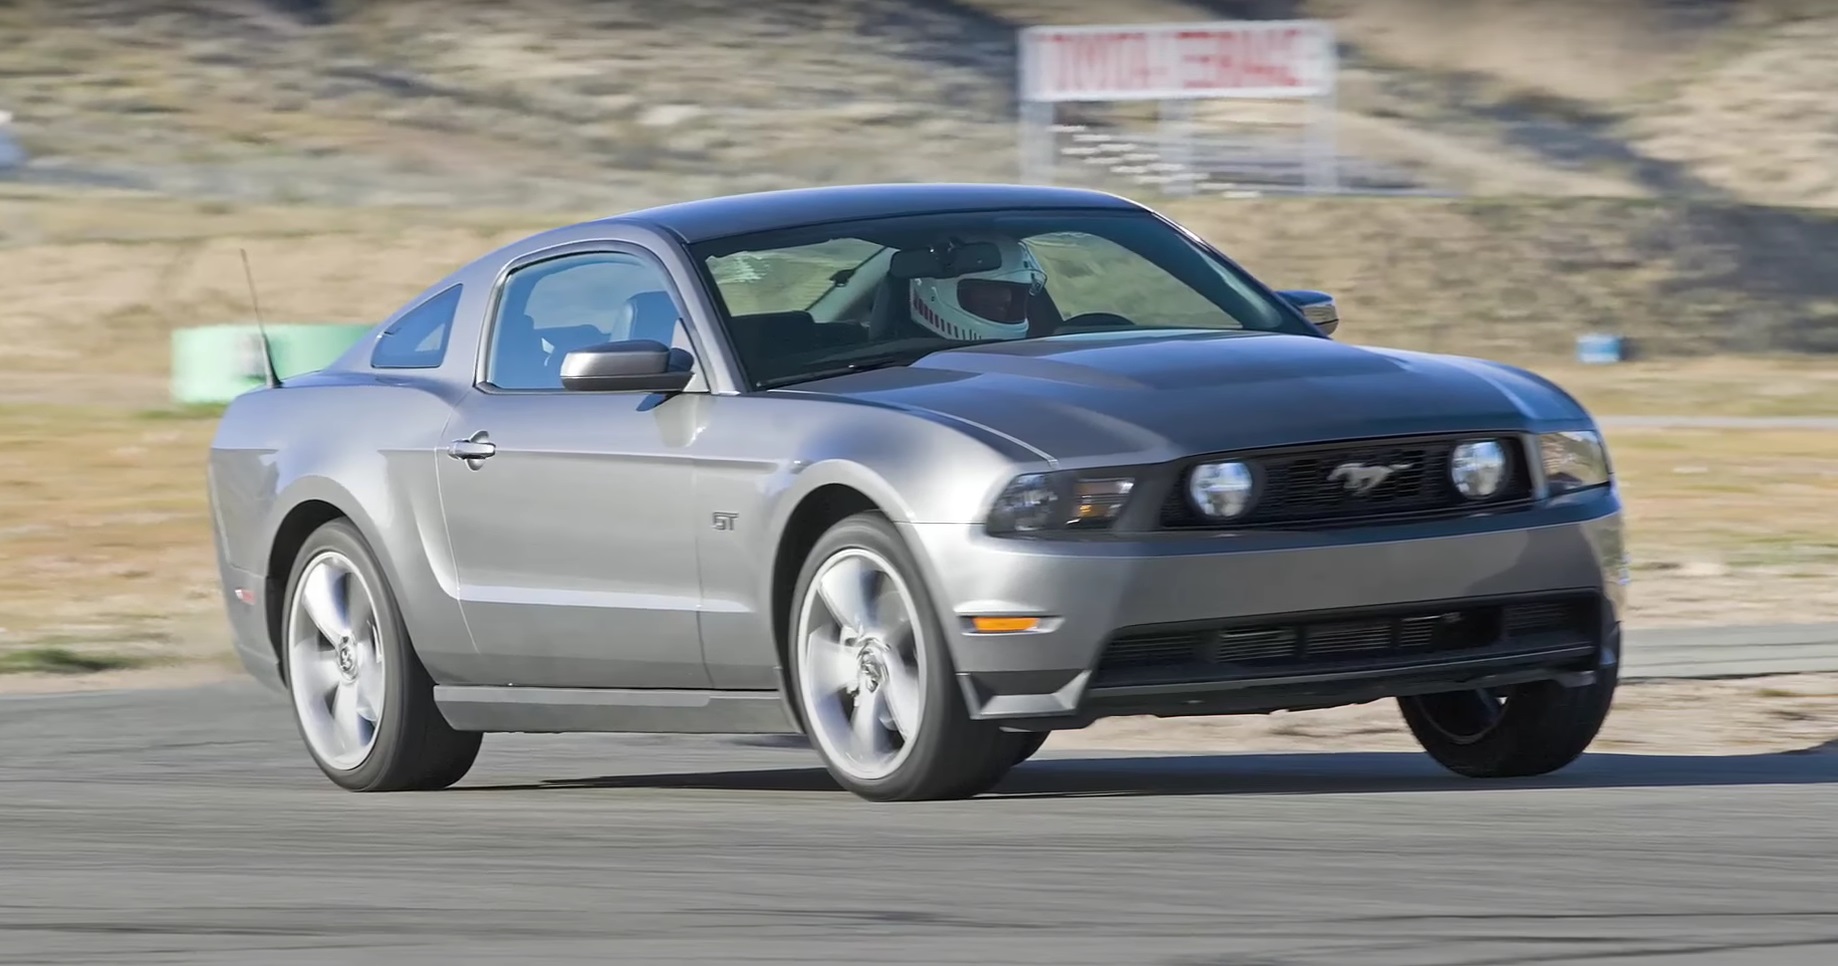 Video: 2010 Ford Mustang GT Quick Specs